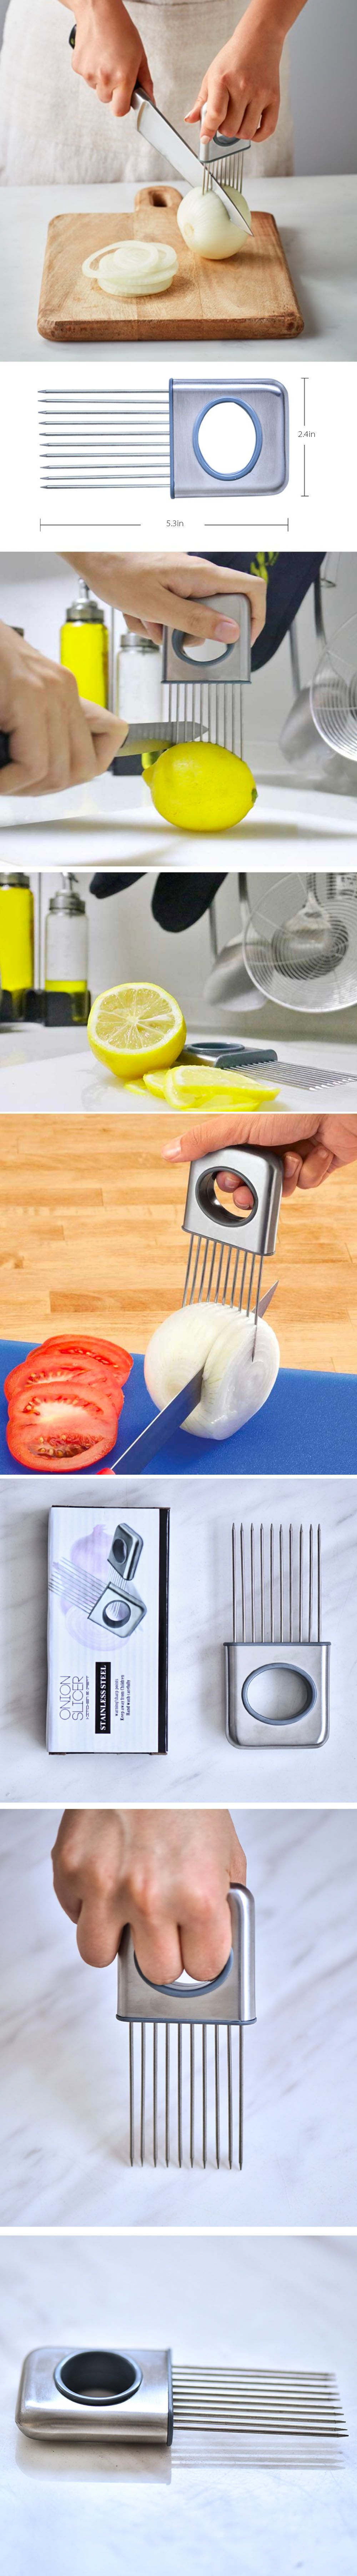 Stainless Steel Fruit And Vegetable Holder For Cutting And Slicing